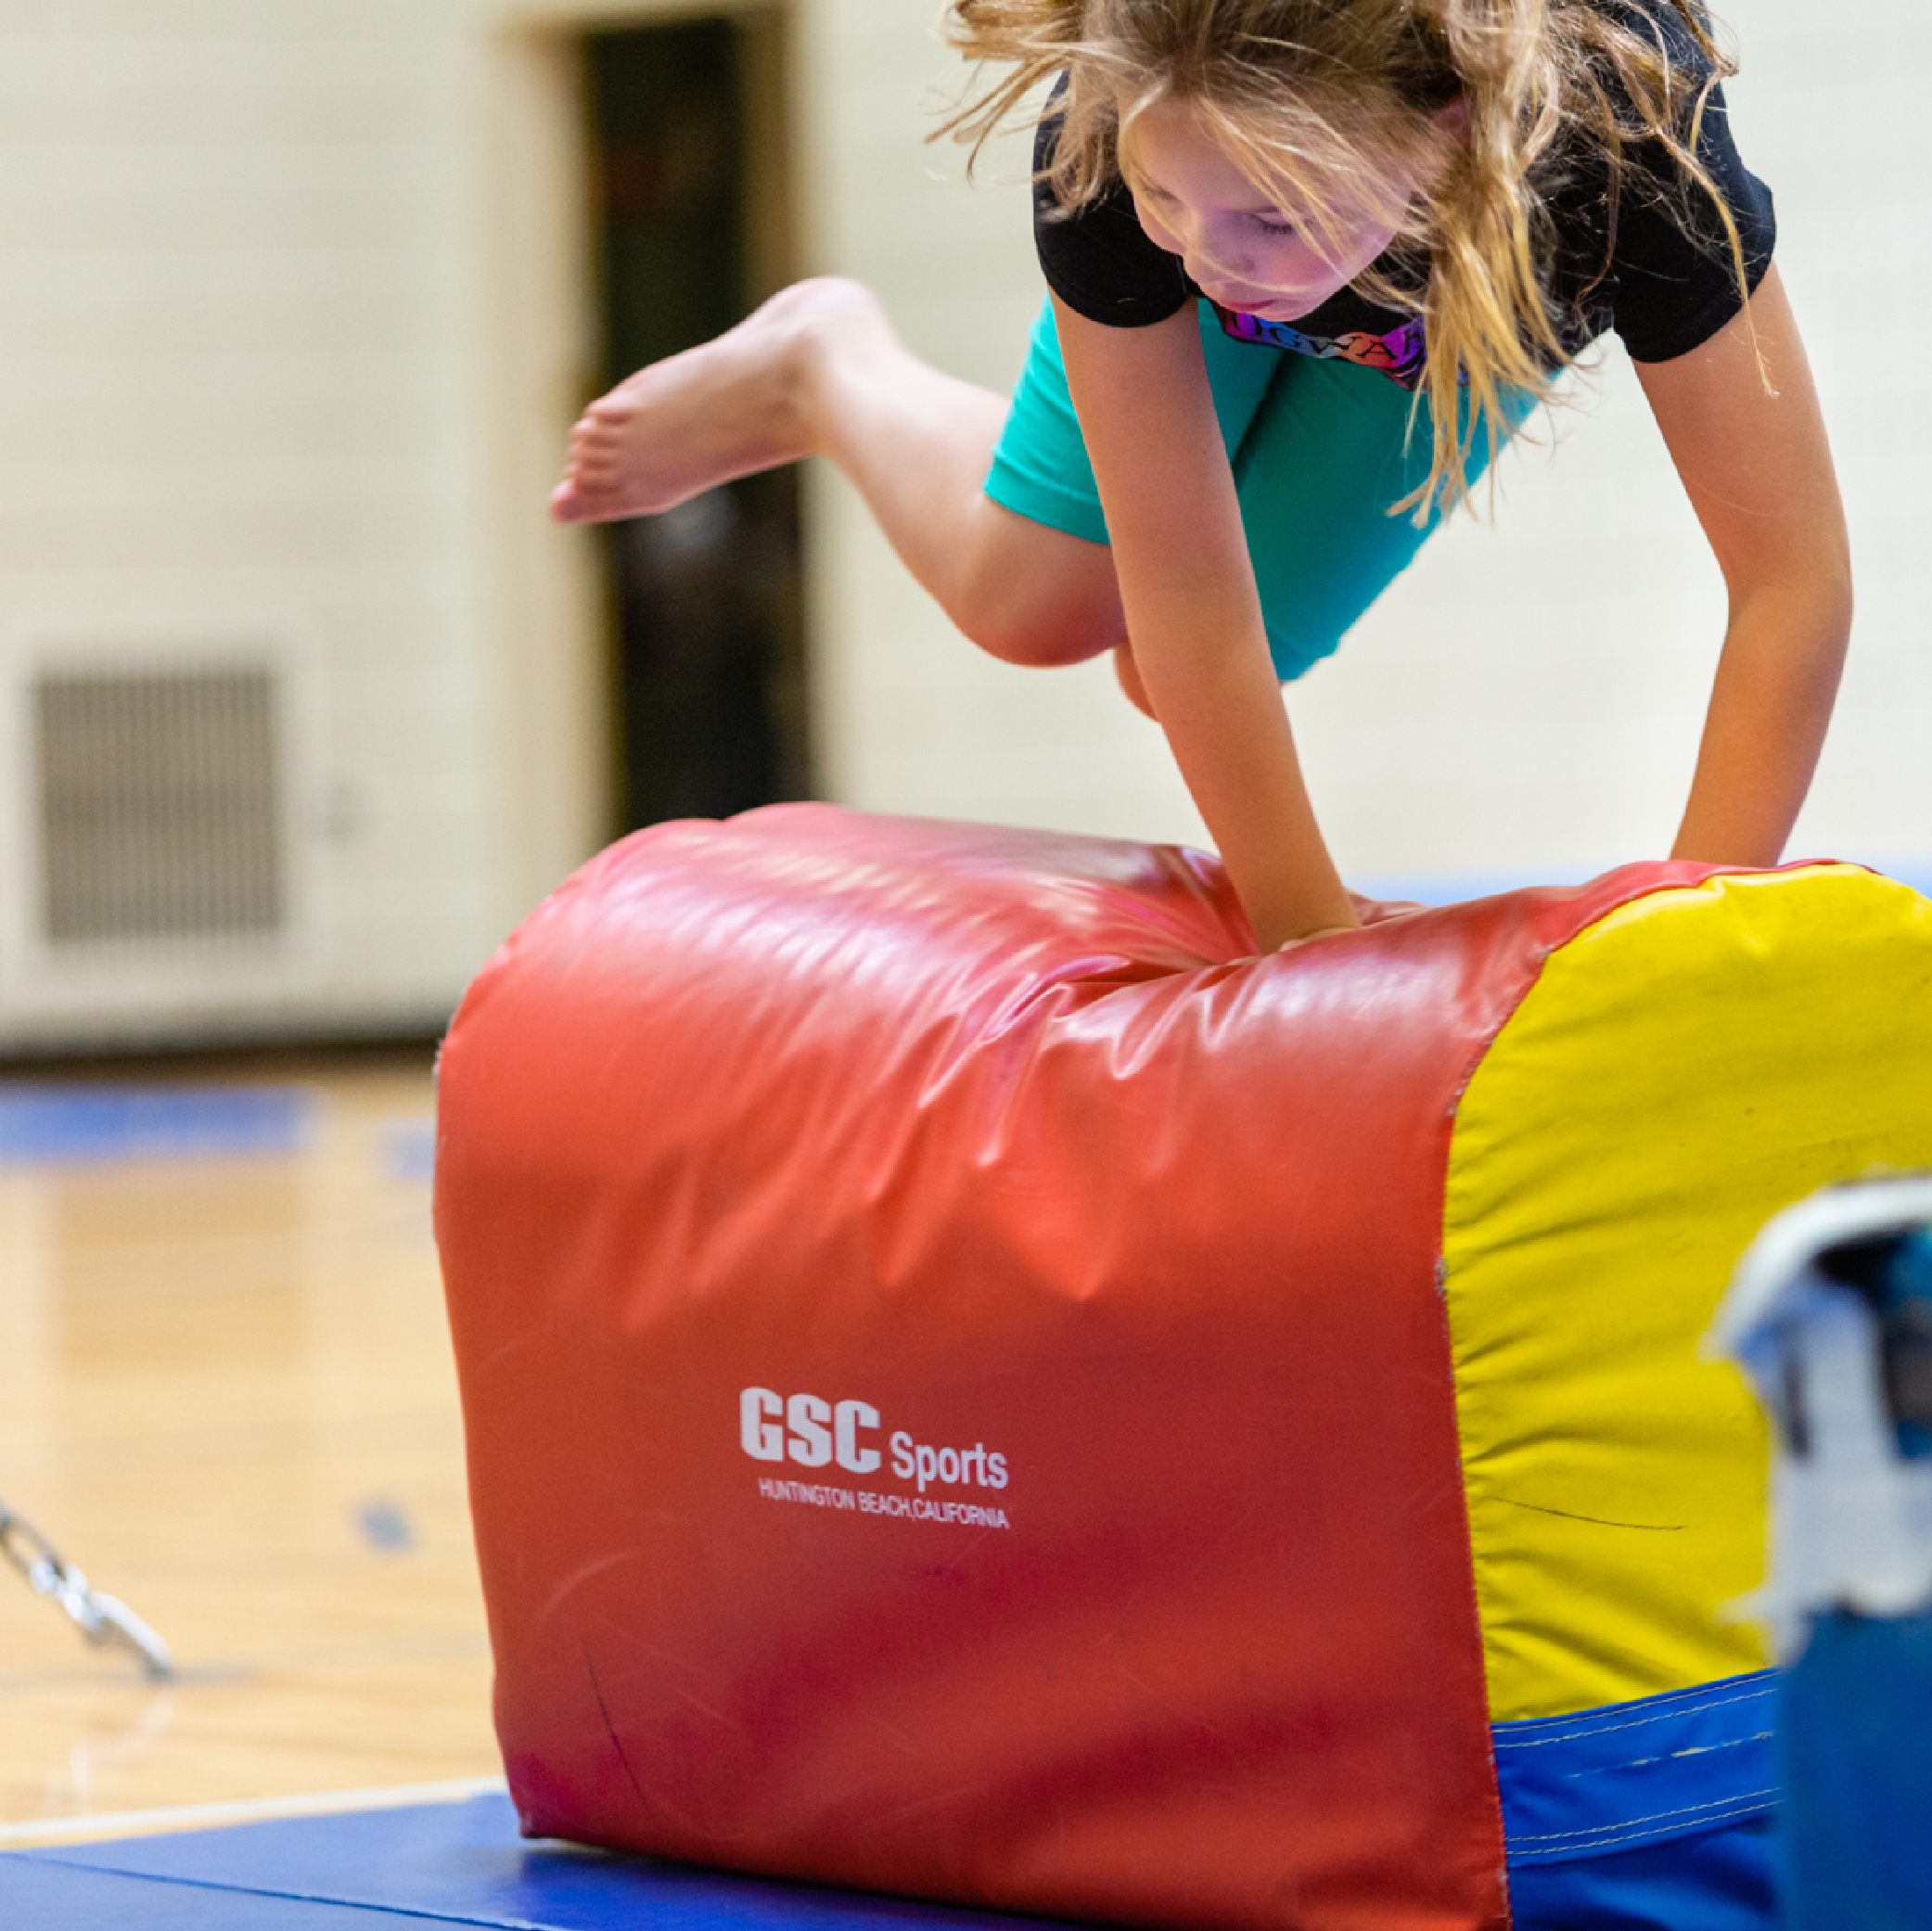 Young girl joyfully jumping over colorful obstacle while participating in Fit Kids fitness program.